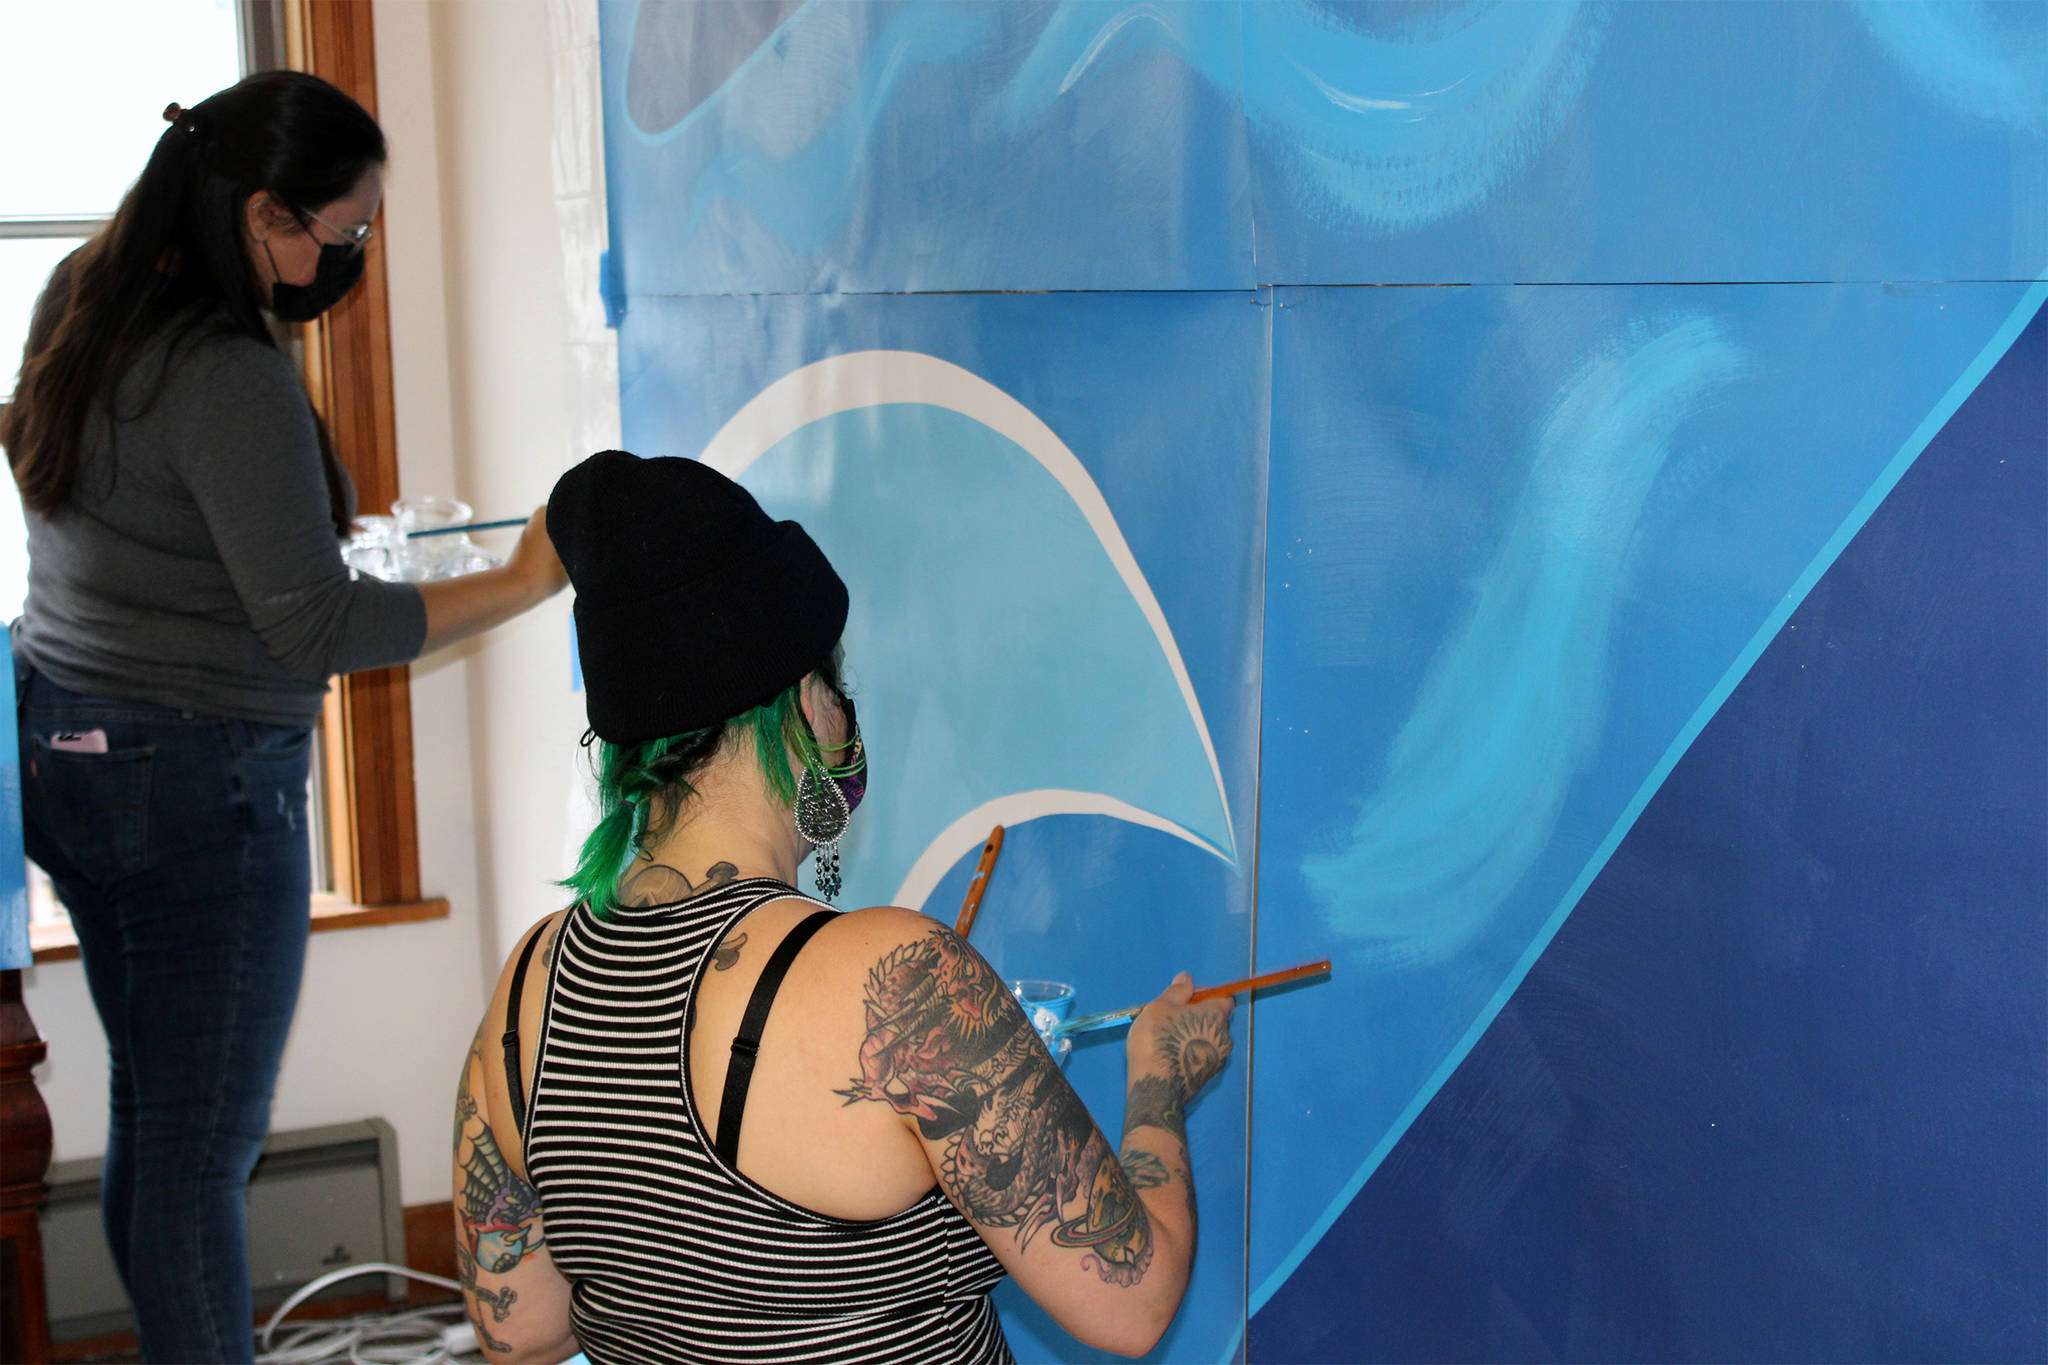 Shara Kay Diamond, left, of Anchorage and Chelsea Bighorn, right, of Sante Fe, apply paint to a section of a mural that will depict Elizabeth Kaaxgal.aat Peratrovich, a Tlingit civil rights icon. The mural is the work of Tlingit and Athabascan artist, designer, and activist Crystal Kaakeeyaa Worl. Kay Diamond and Bighorn are apprentices on the project. (Dana Zigmund/Juneau Empire)